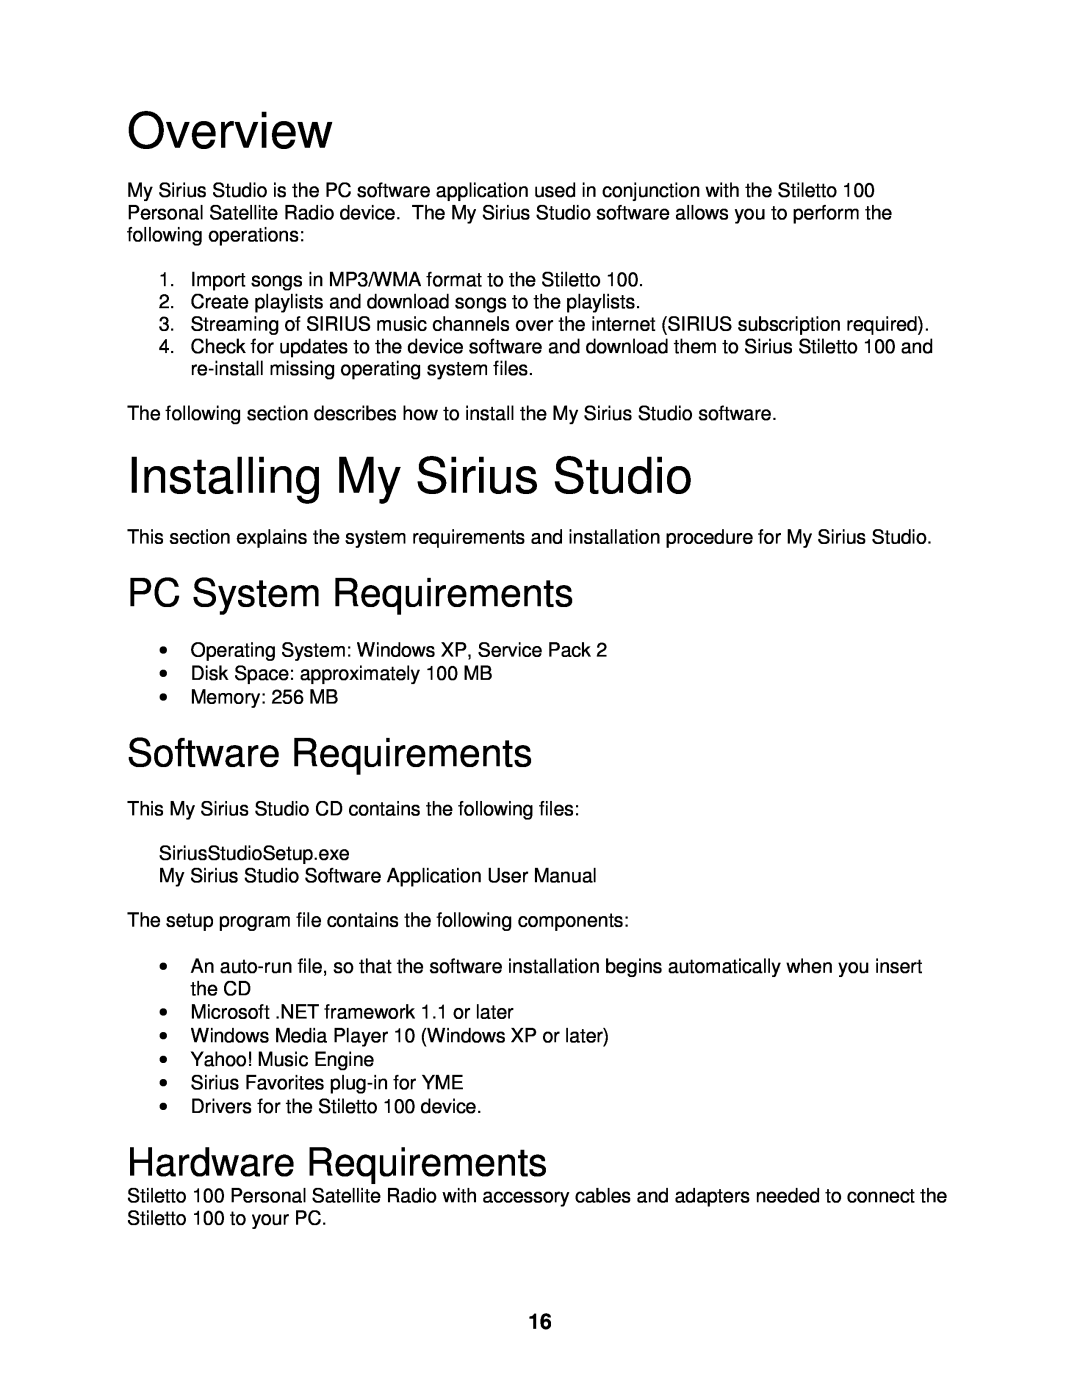 Sirius Satellite Radio 100 manual Overview, Installing My Sirius Studio, PC System Requirements, Software Requirements 